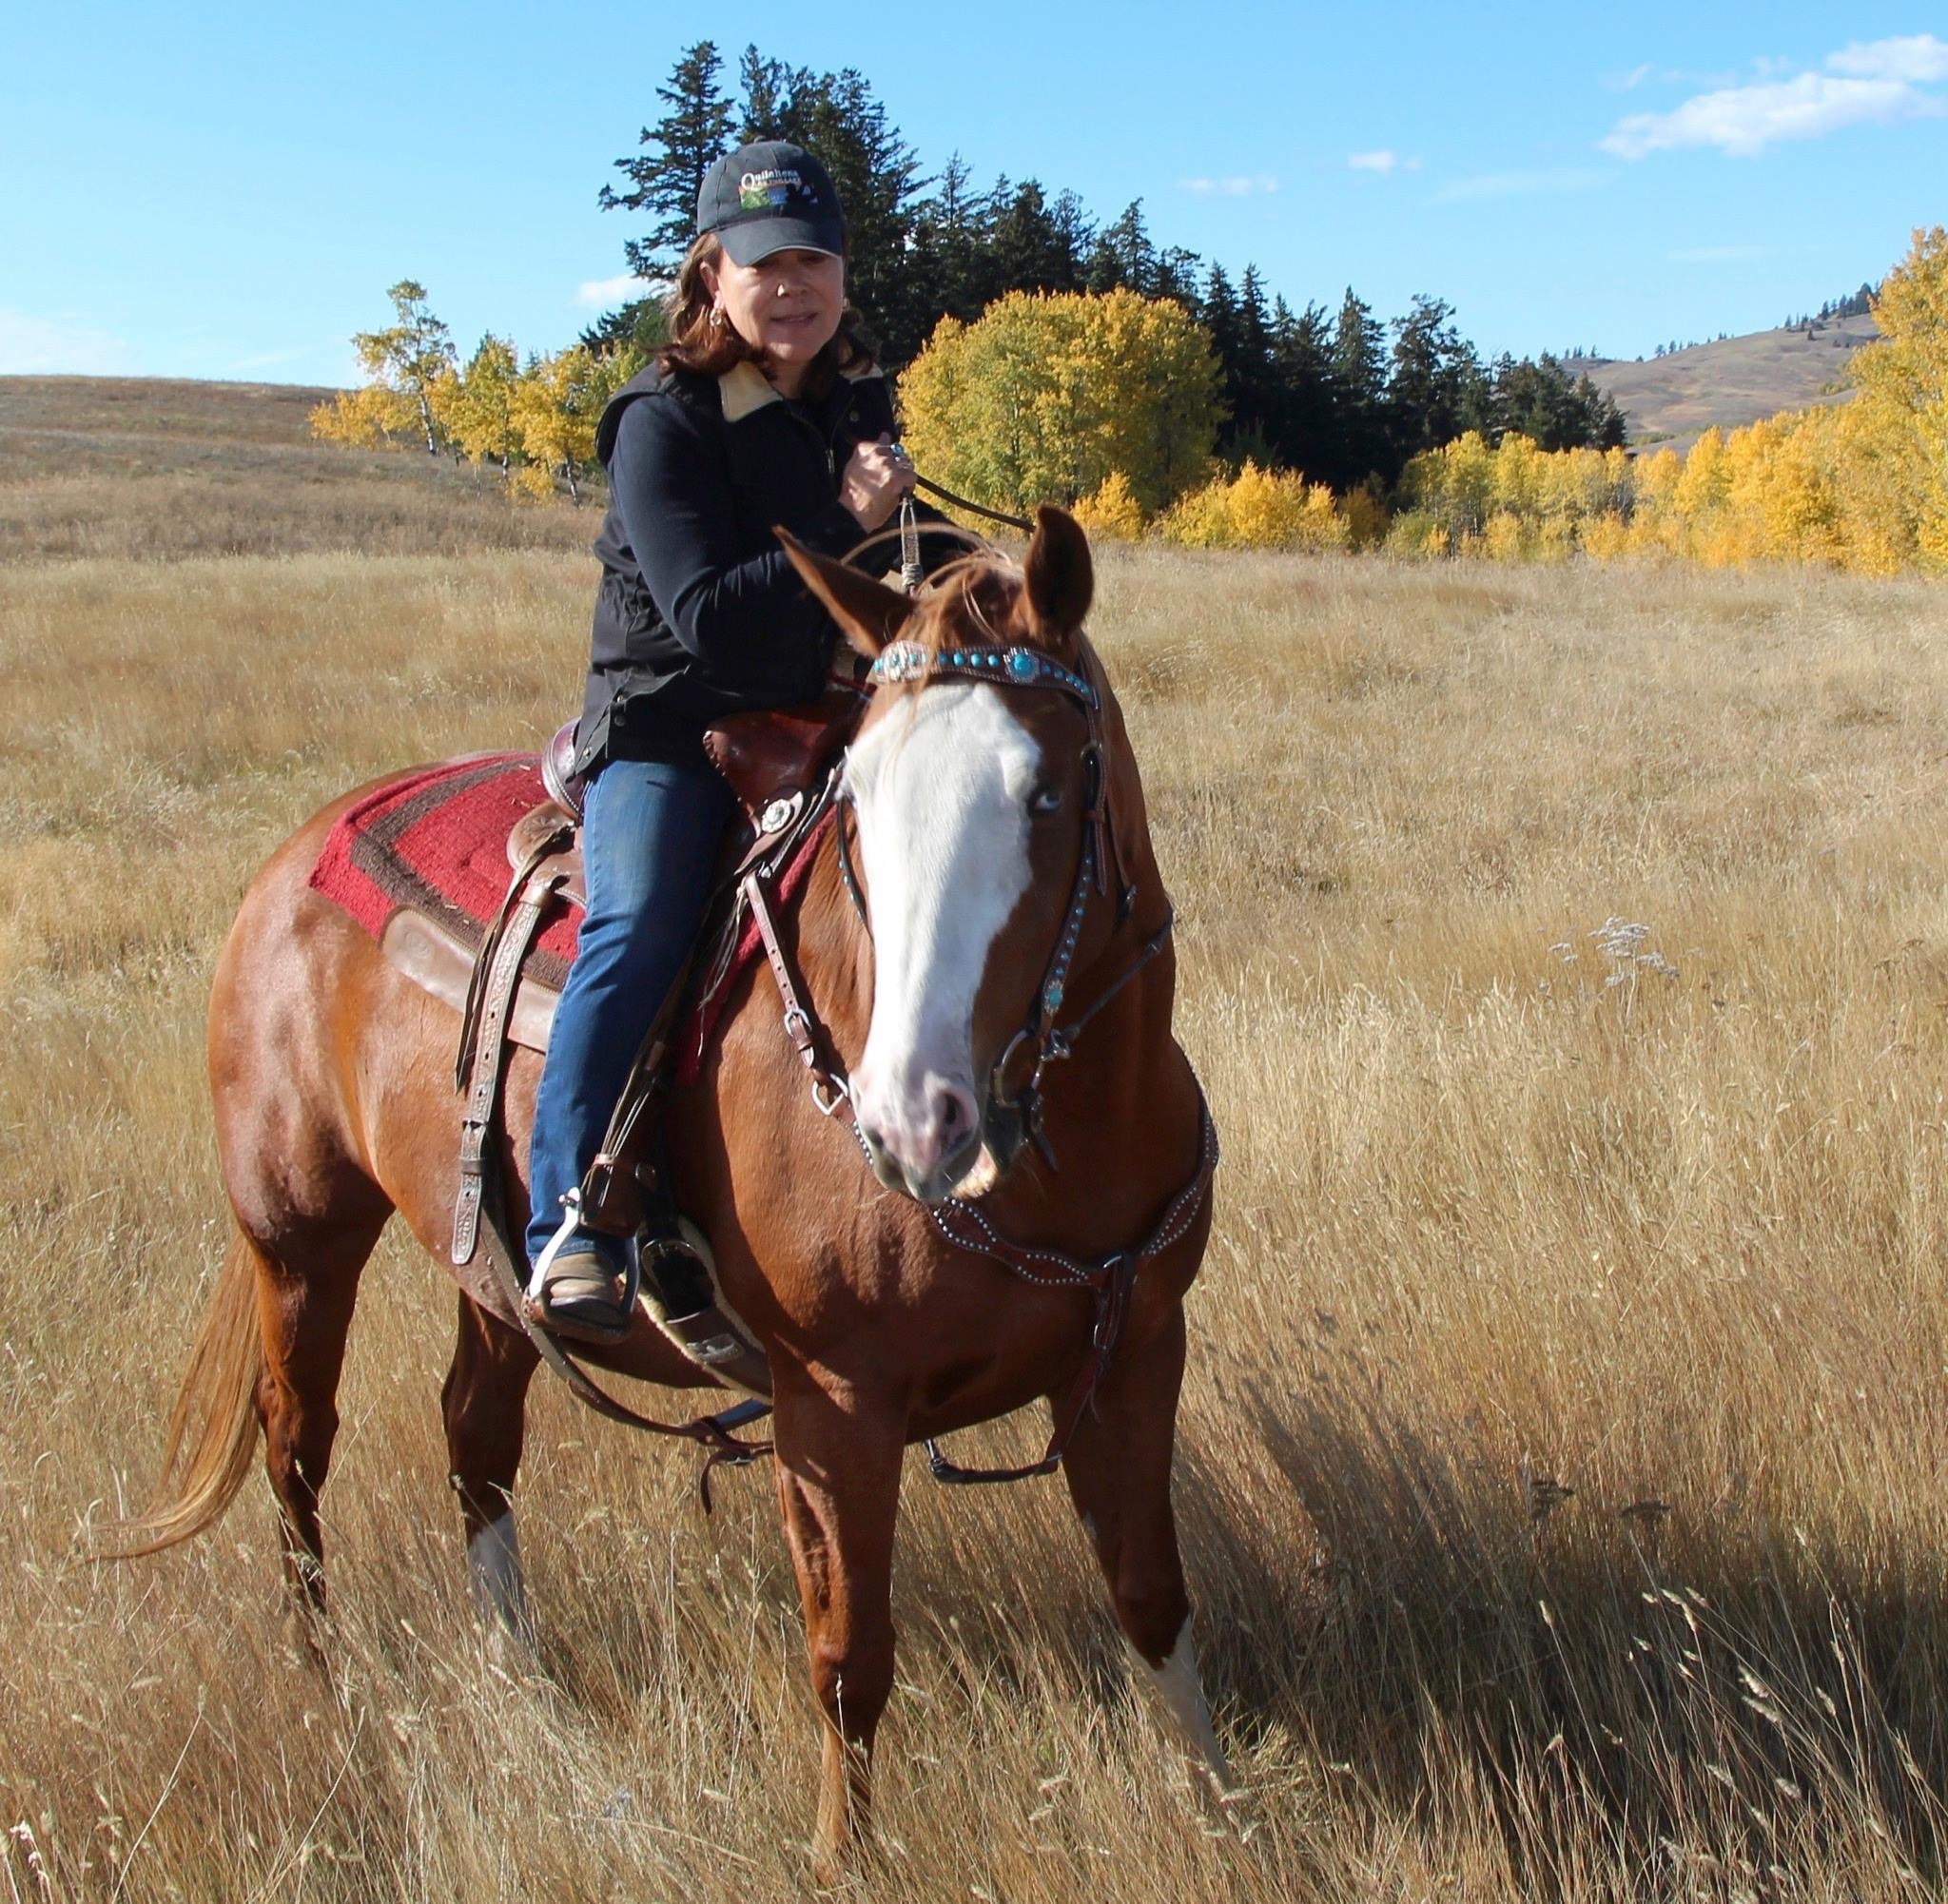 A brunette woman with a ball cap on rides a brown horse in a large open field on a sunny day in the fall 